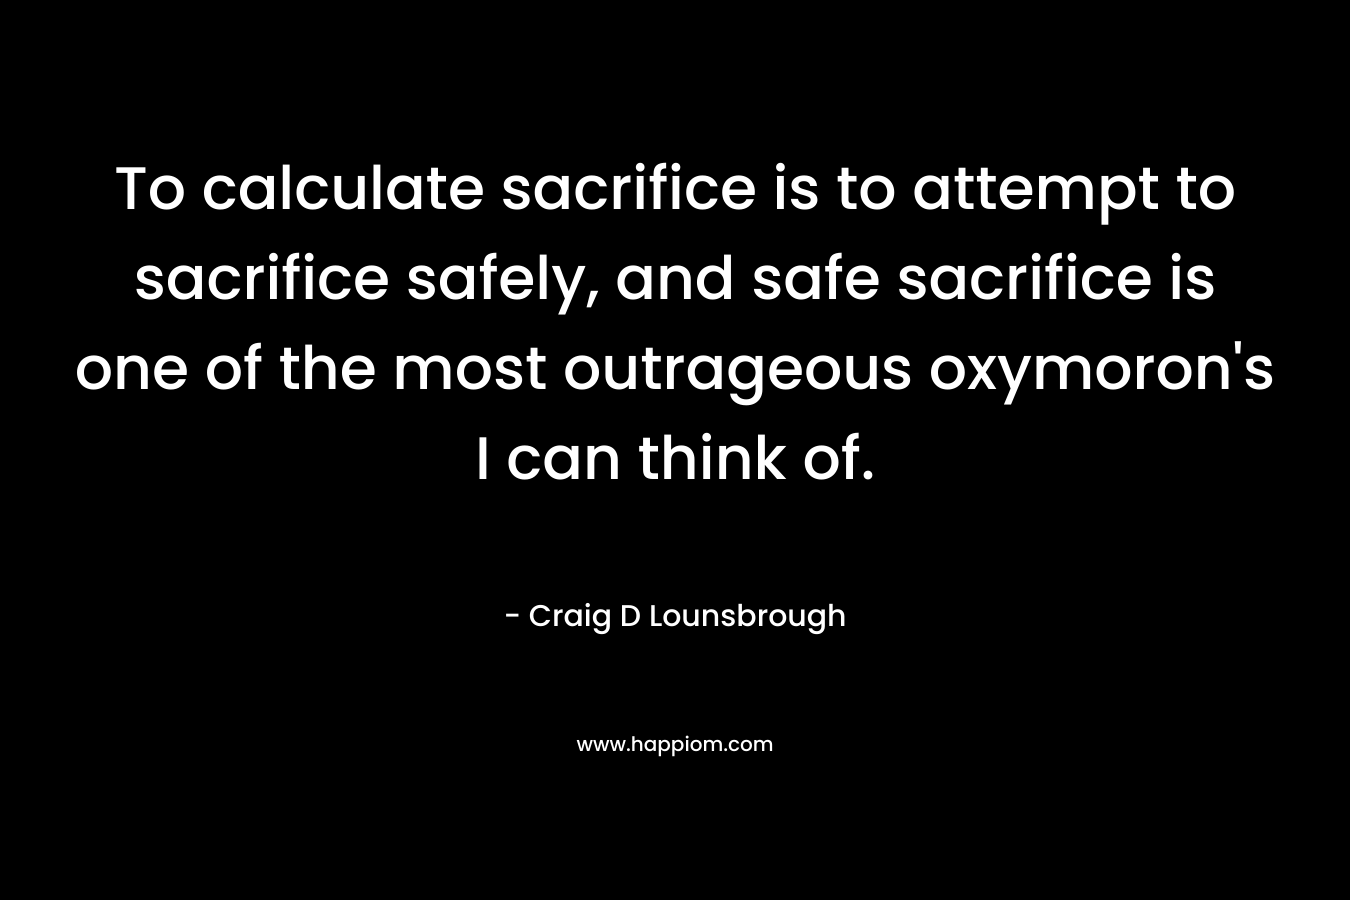 To calculate sacrifice is to attempt to sacrifice safely, and safe sacrifice is one of the most outrageous oxymoron's I can think of.